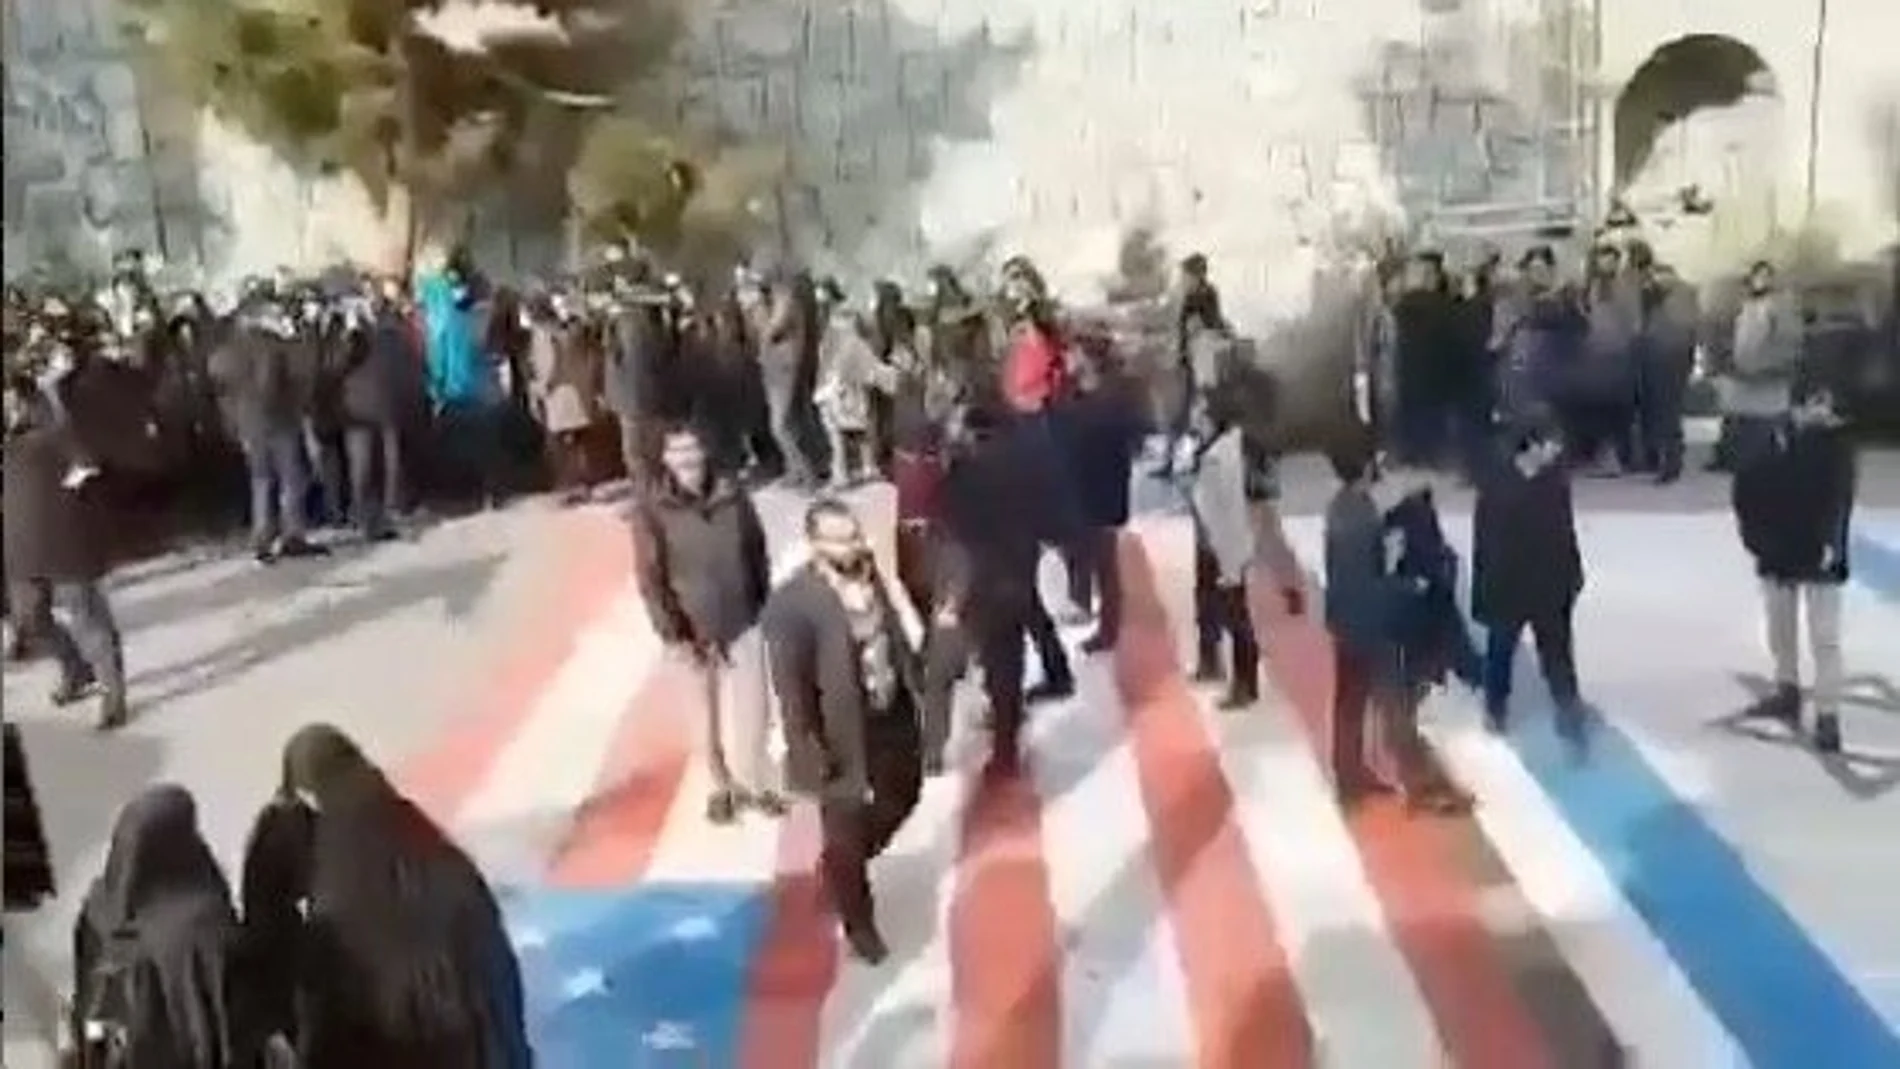 Social media video still shows several people walking on U.S. and Israeli flags while others avoid stepping on the flags by walking around them, at the Shahid Beheshti University in Tehran